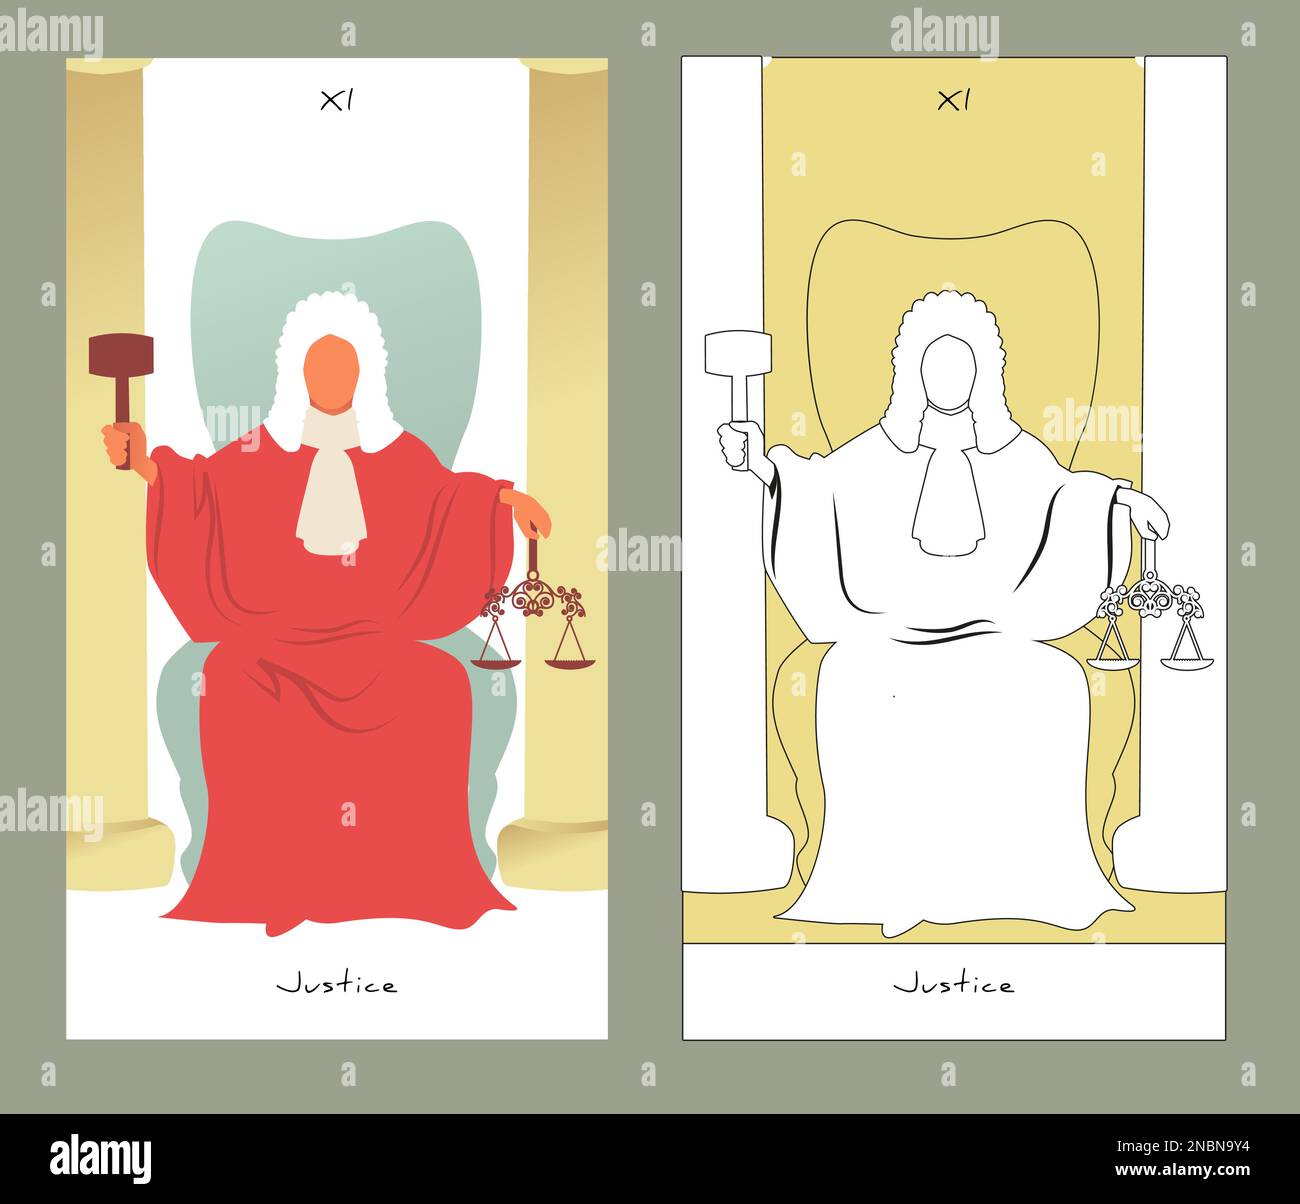 Major Arcana Tarot Cards. Stylized design. Justice. Figure dressed in a wig and judge's clothes, holding a hammer in one hand and a scale in another Stock Vector